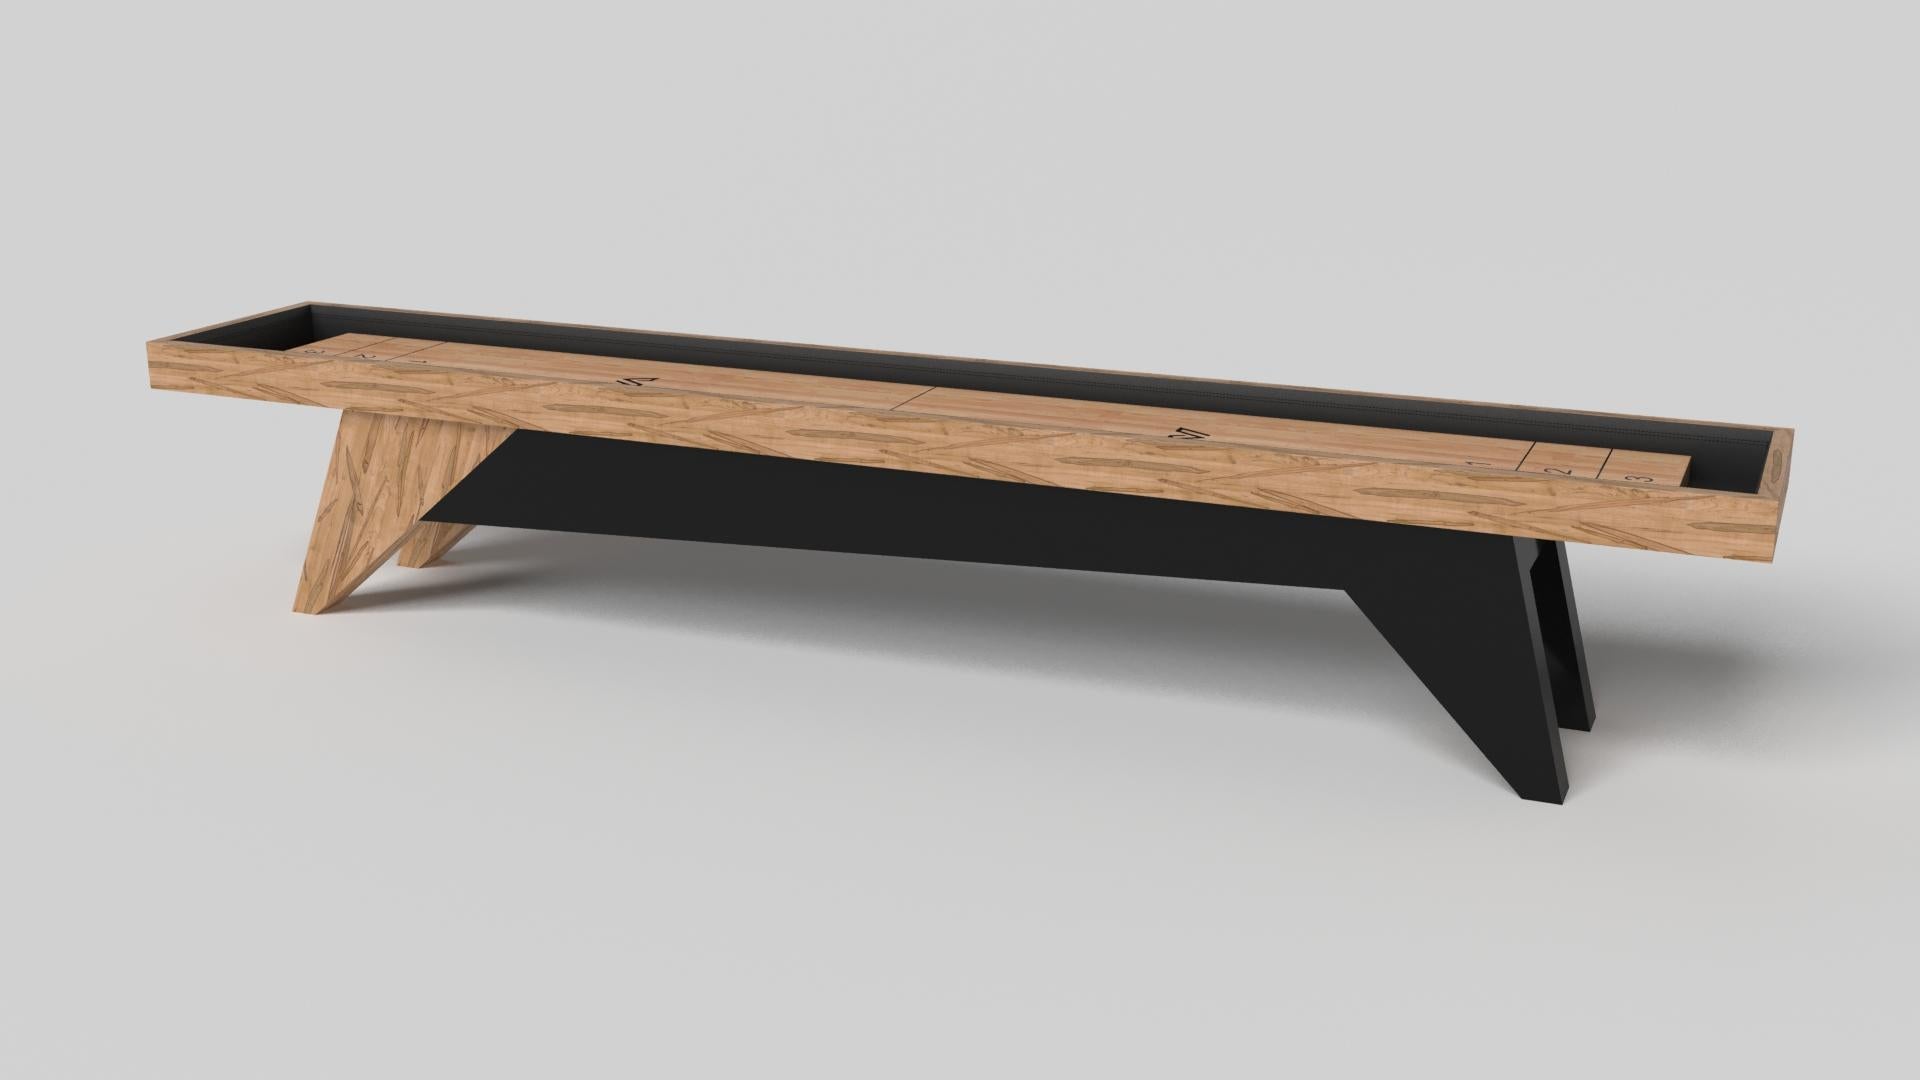 Simple yet sophisticated, the Mantis shuffleboard table puts a fresh, modern spin on a classic four-legged design. Sharp angles and tapered legs provide sleek stability.

Size:

16 Foot - 192”X32”X34”
Playing Area Of 176”X20”